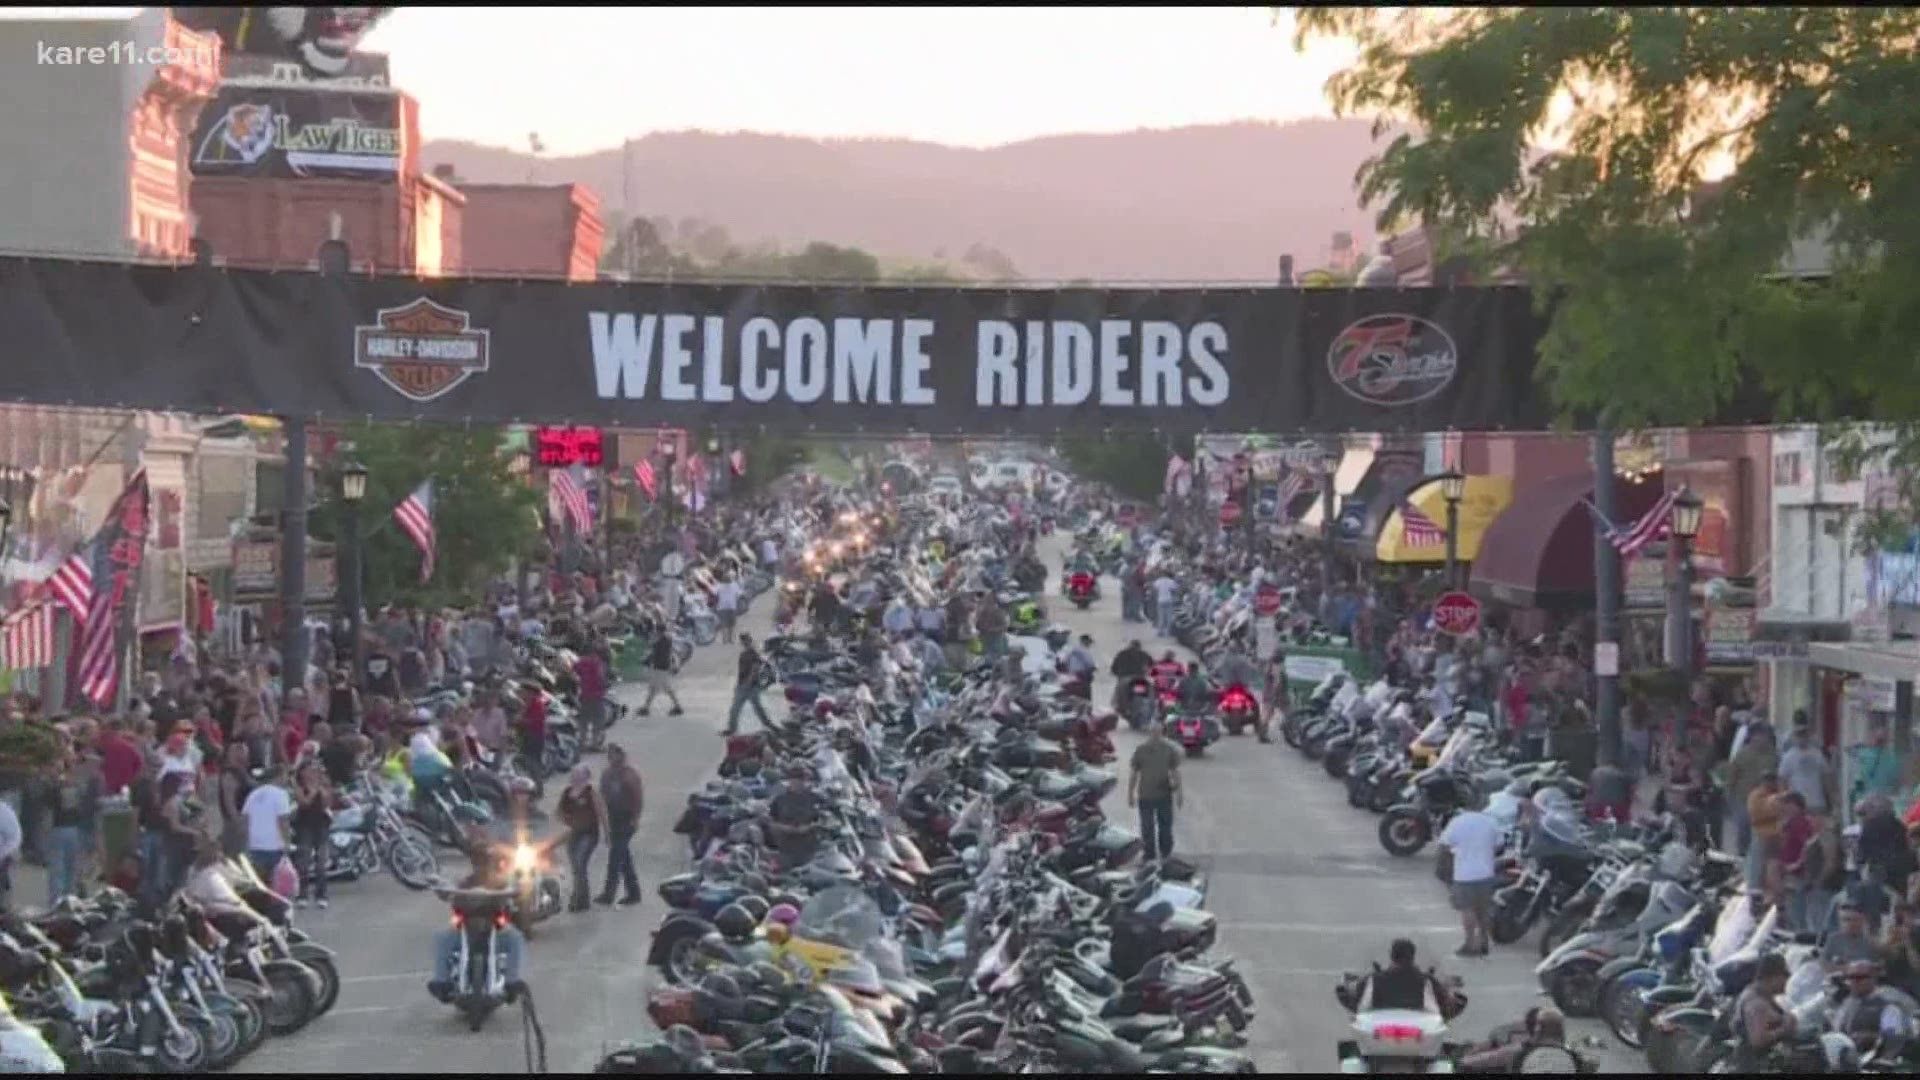 Sturgis Motorcycle Rally 2020 resulted in widespread COVID cases